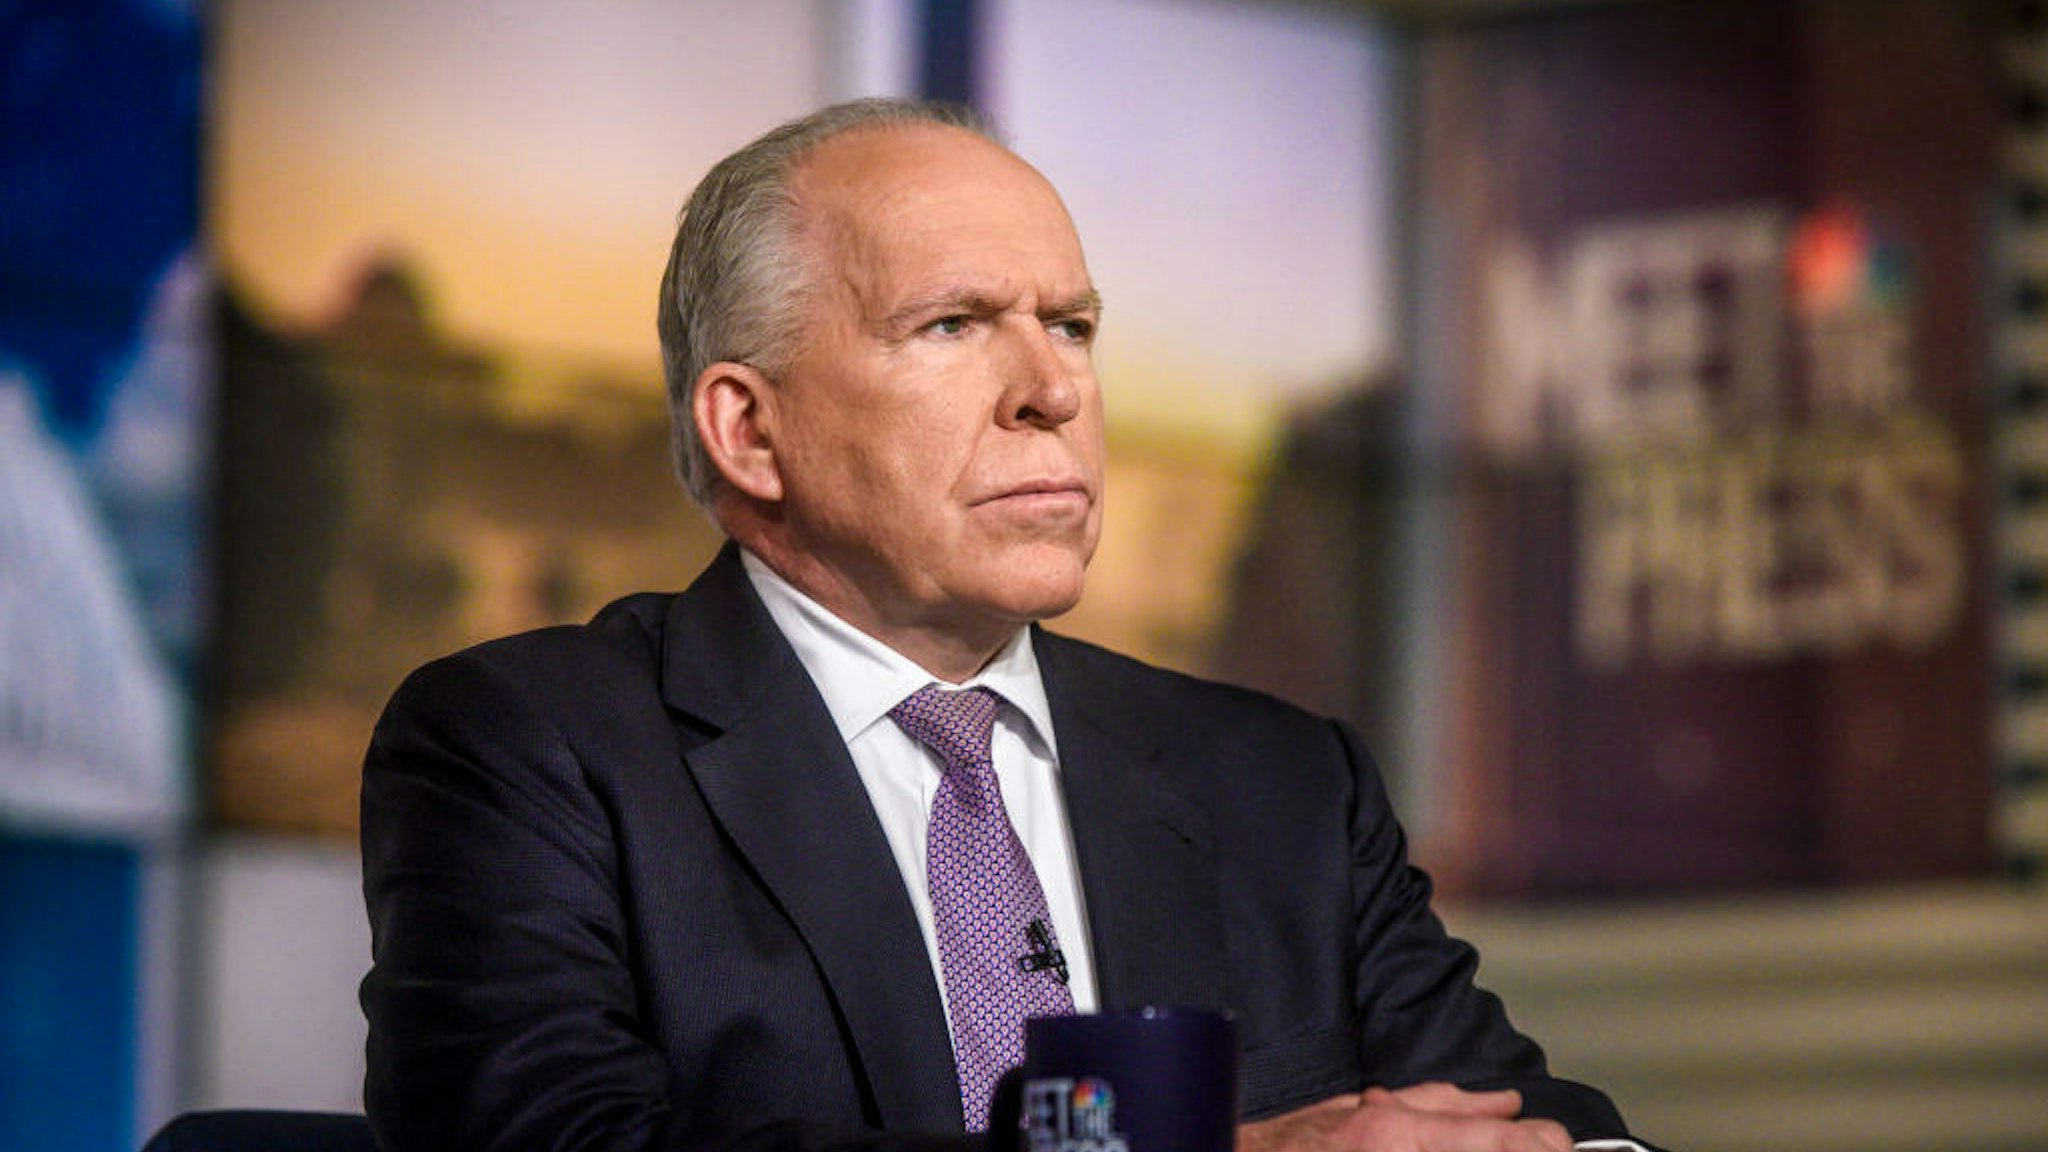 John Brennan, Former CIA Director; NBC News Senior National Security and Intelligence Analyst, appears on "Meet the Press" in Washington, D.C., Sunday, April 15, 2018. (Photo by: William B. Plowman/NBC/NBC NewsWire via Getty Images)